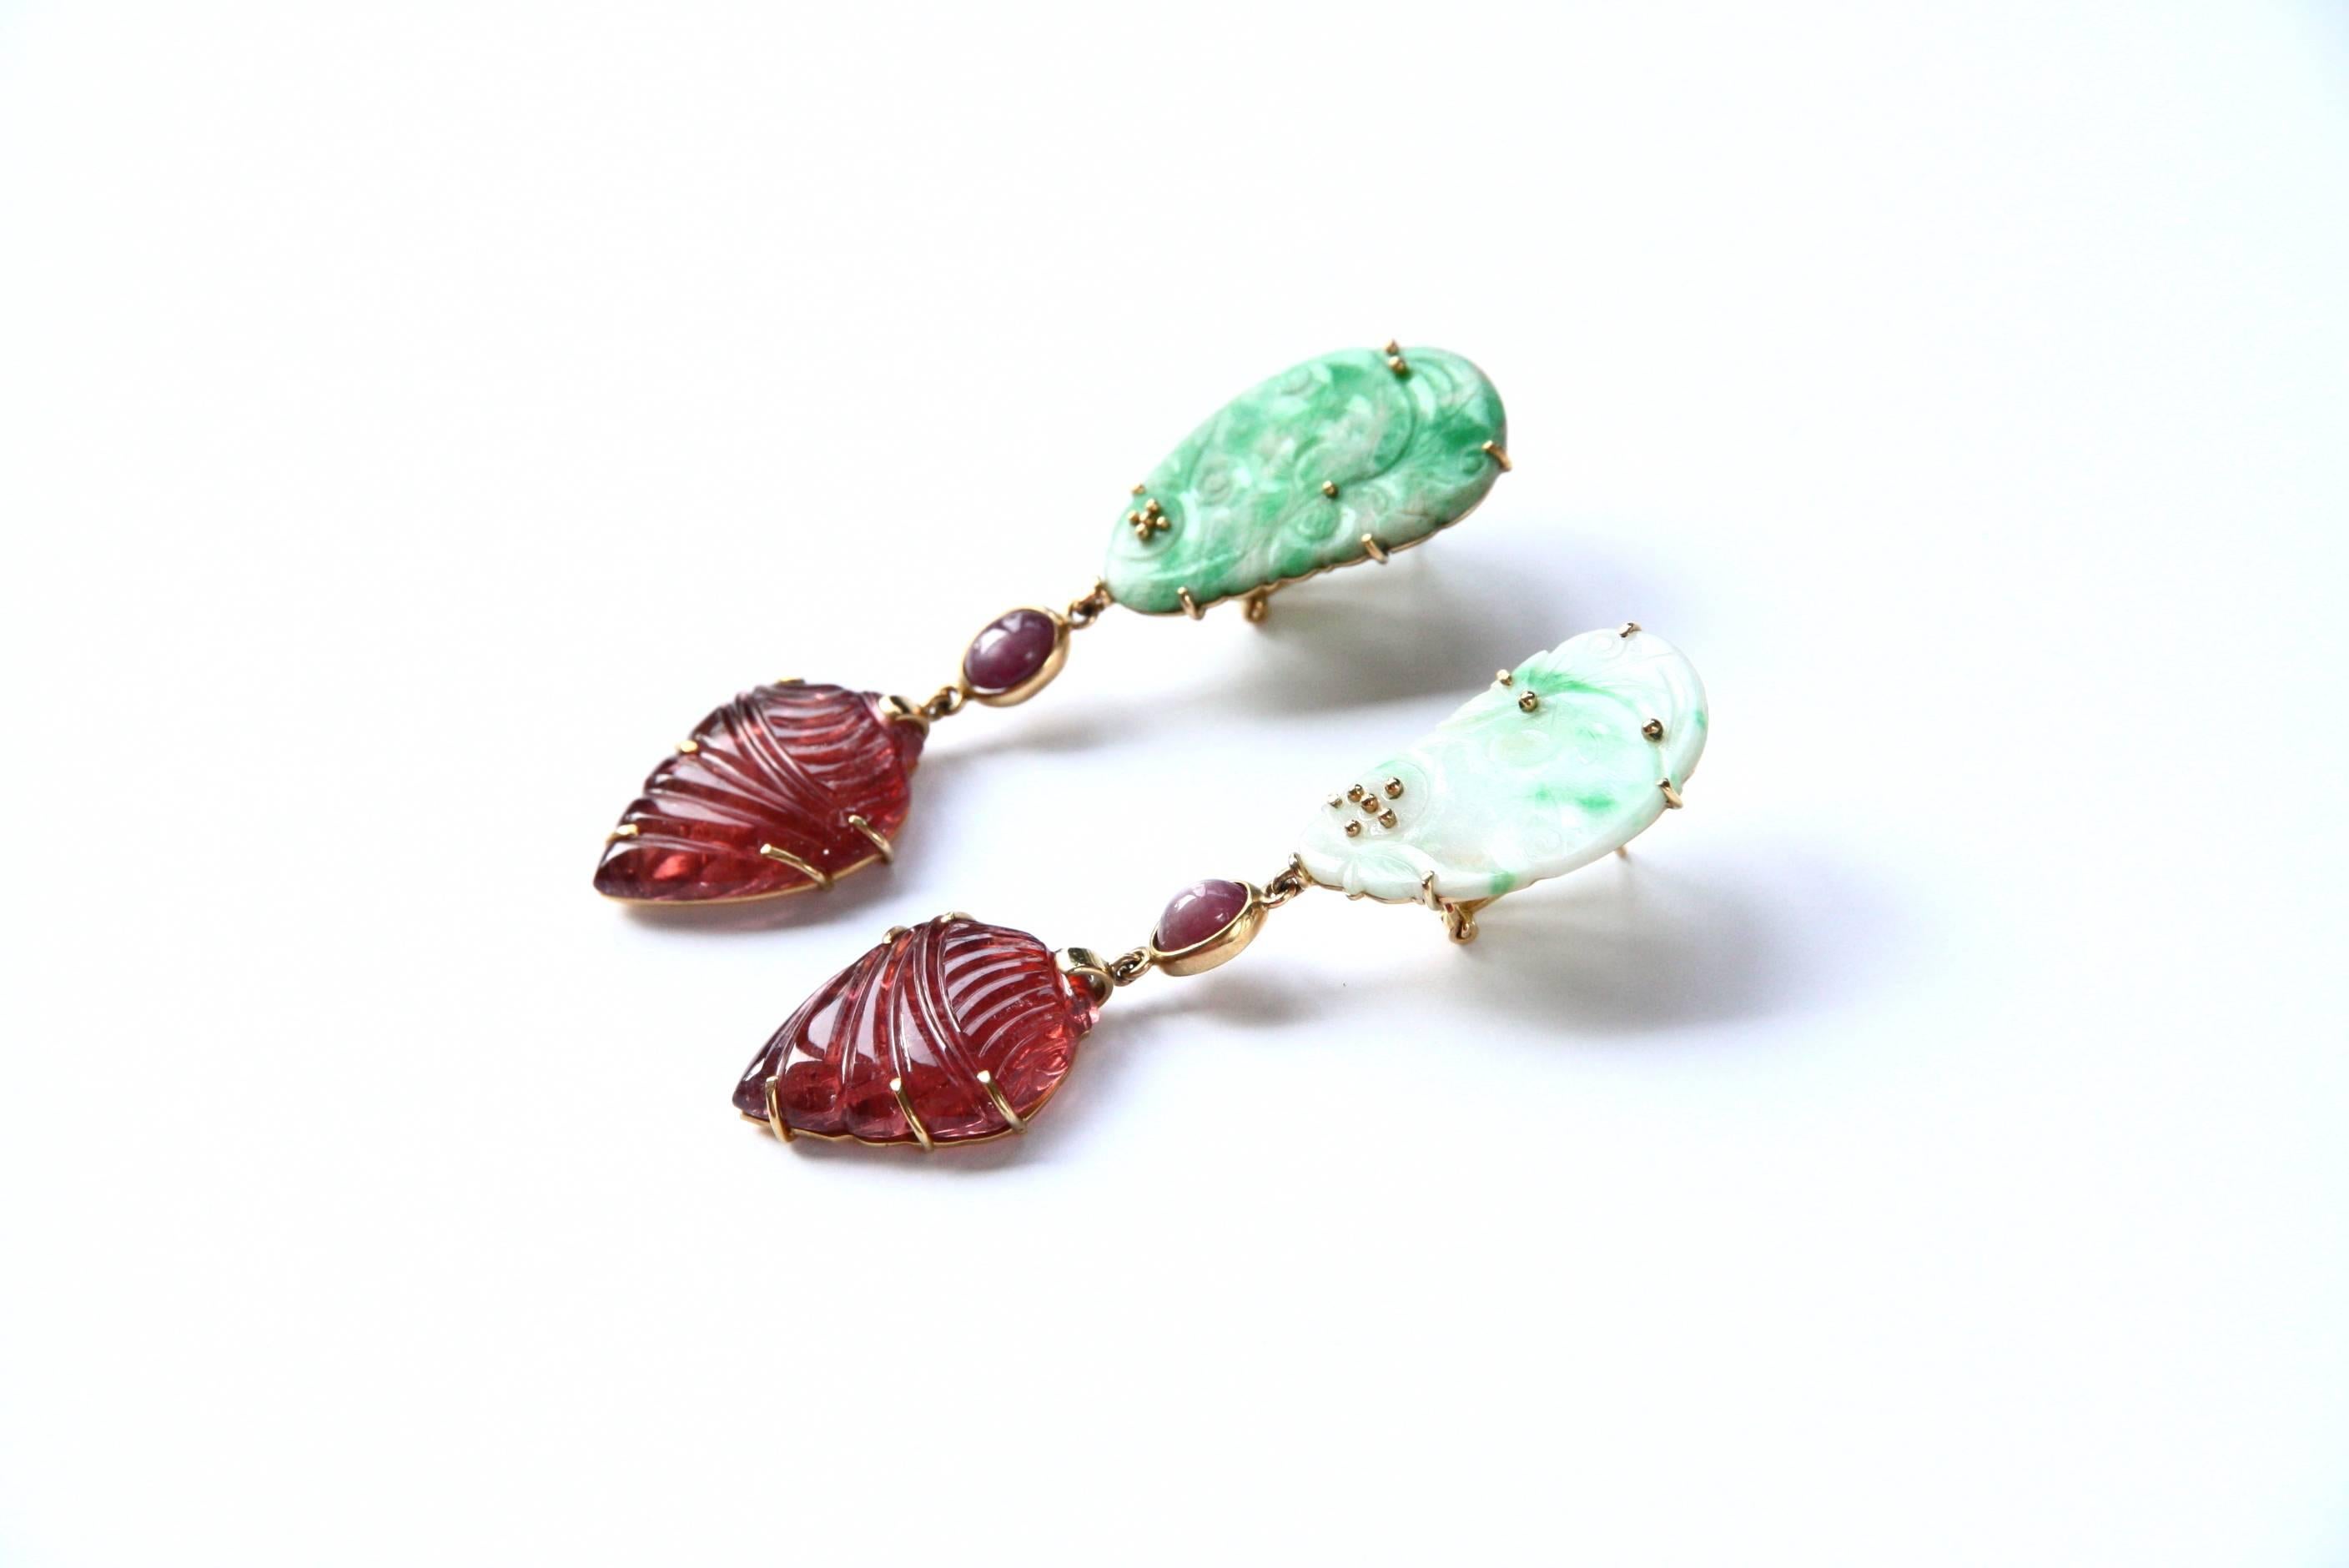 Very Special earrings made with antiques cinese  carved Jade, Star Ruby cabochon and engrave Pink Tourmaline  pinecone shape.
18 kt Gold gr 8,40 total length weight 
All Giulia Colussi jewelry is new and has never been previously owned or worn. Each